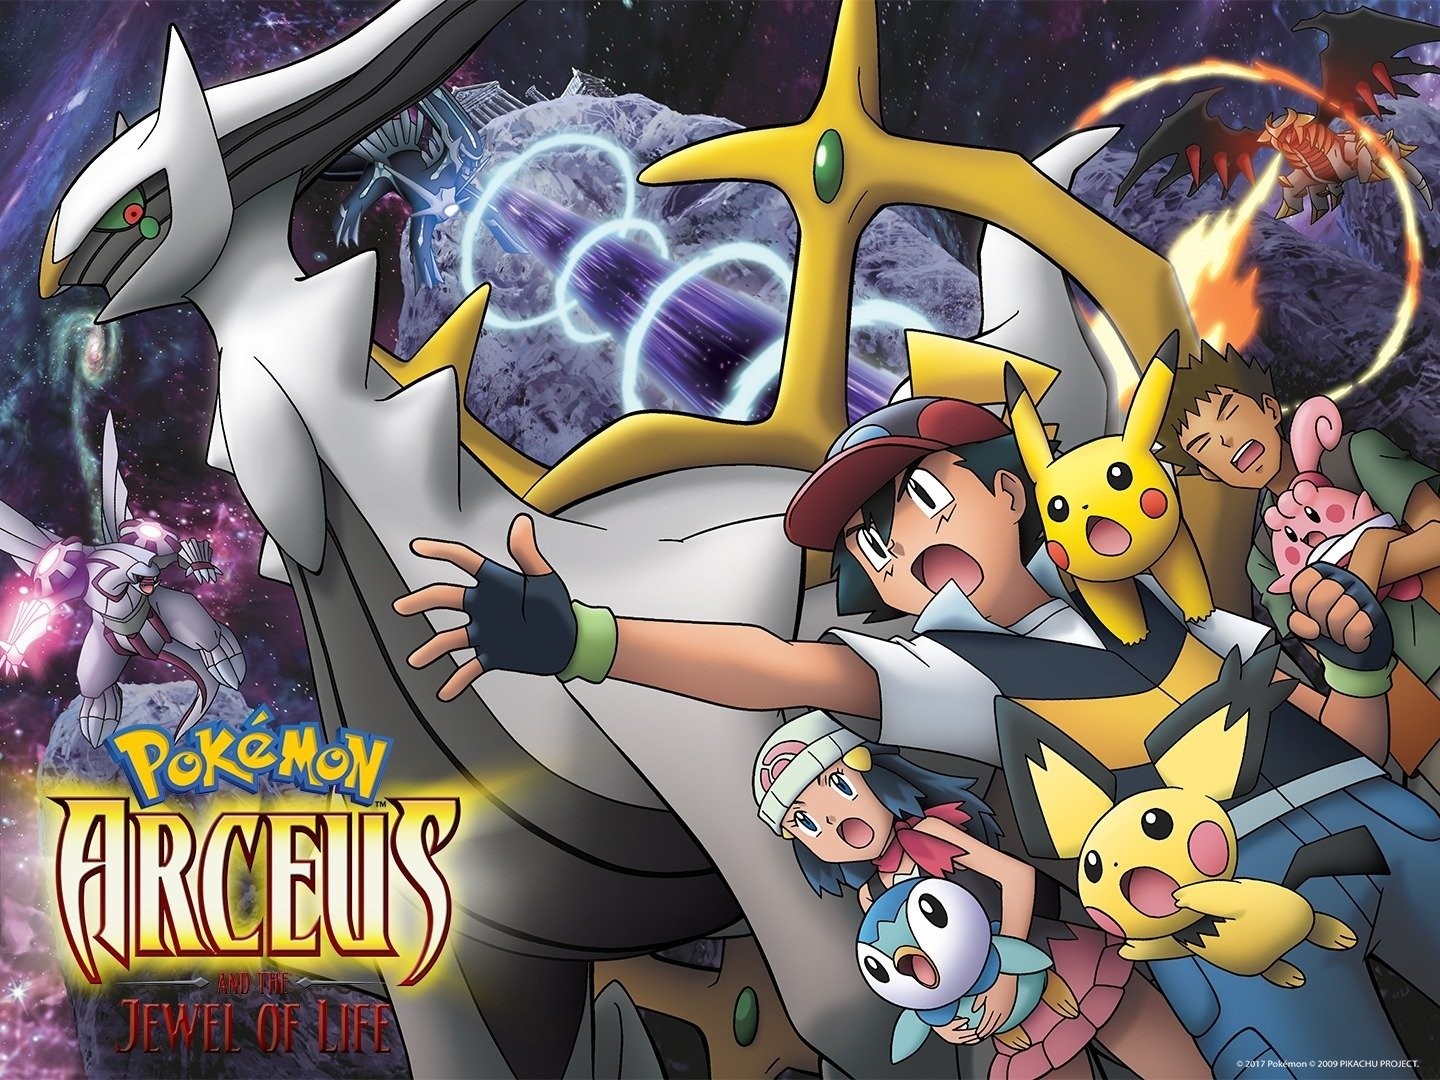 Arceus and the Jewel of Life - Where to Watch and Stream - TV Guide